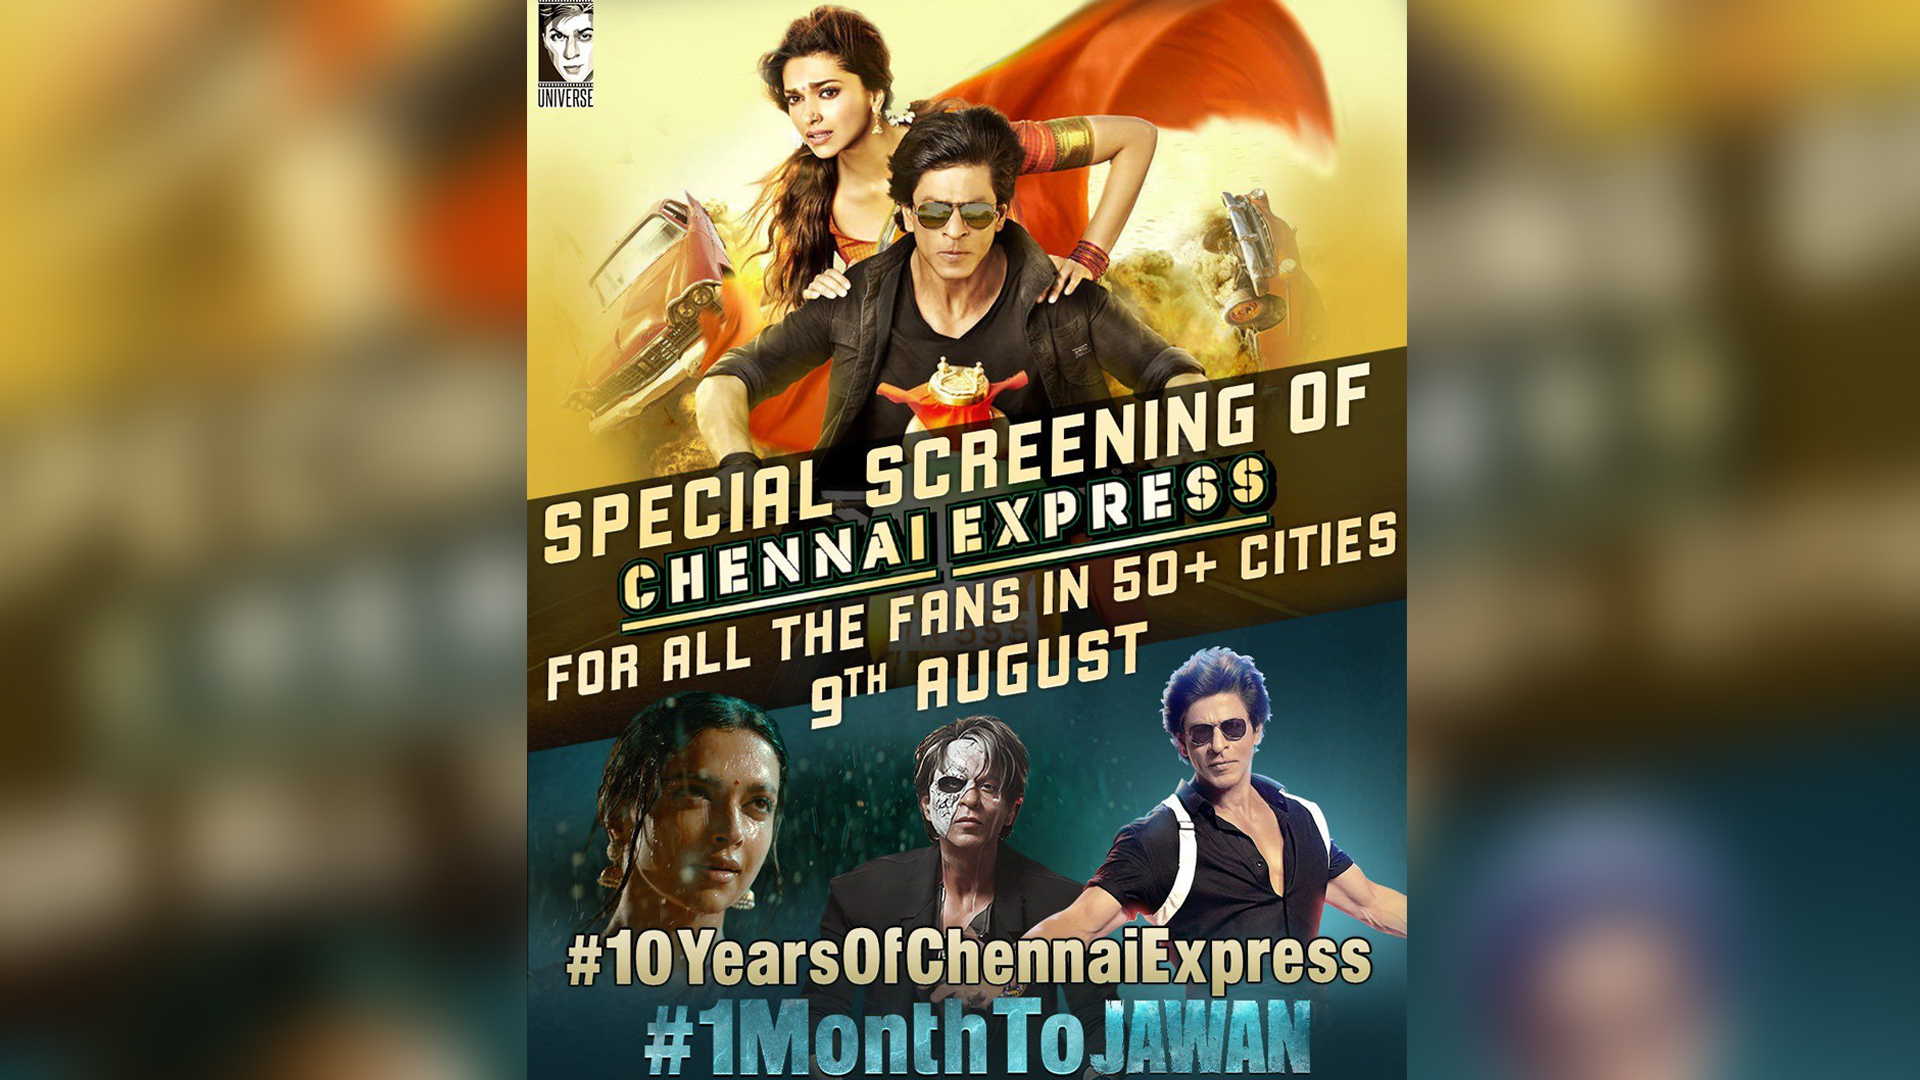 SRK Universe commences Jawan promotional campaign in a magnificent manner, arranging Chennai Express screening in over 52 cities!